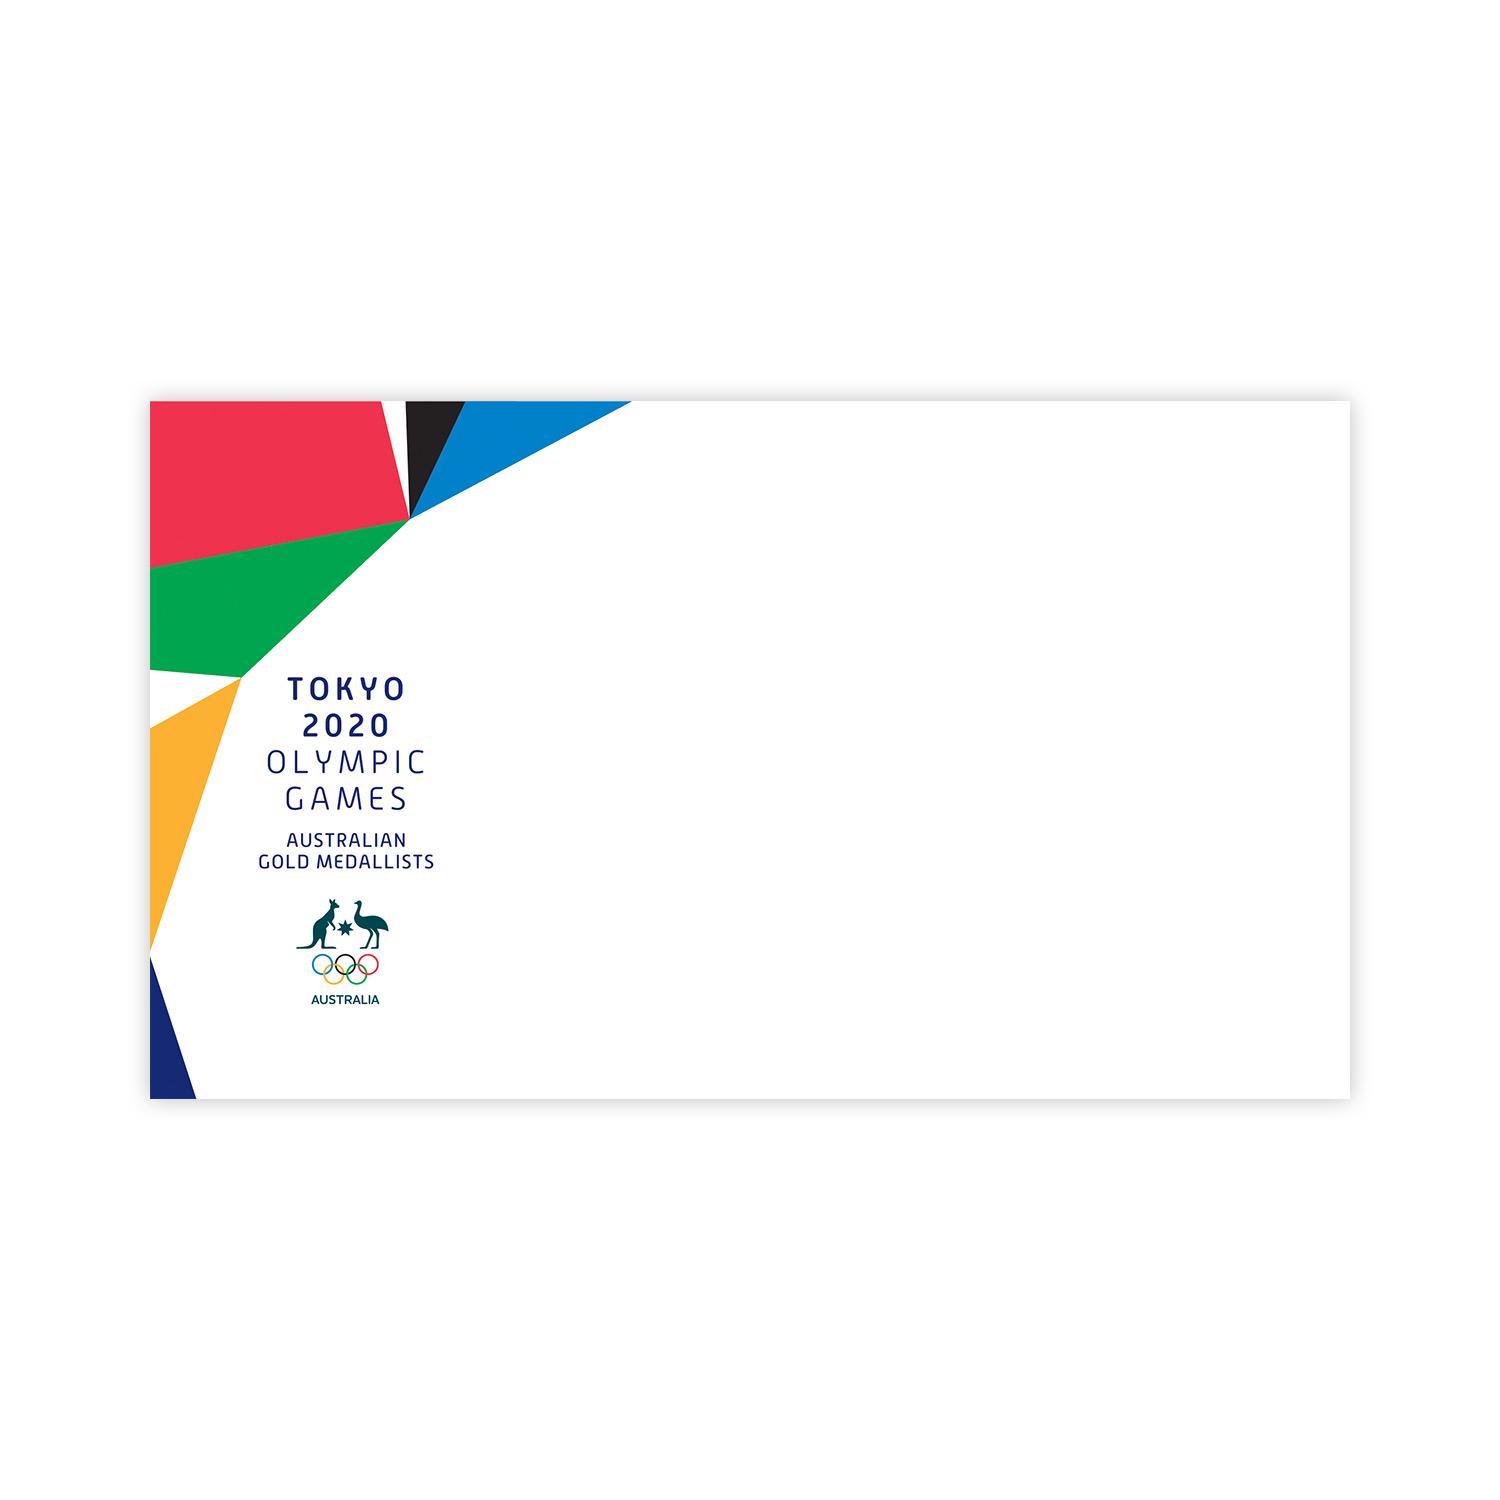 Pictorial Envelope for the Tokyo 24 Olympic Games